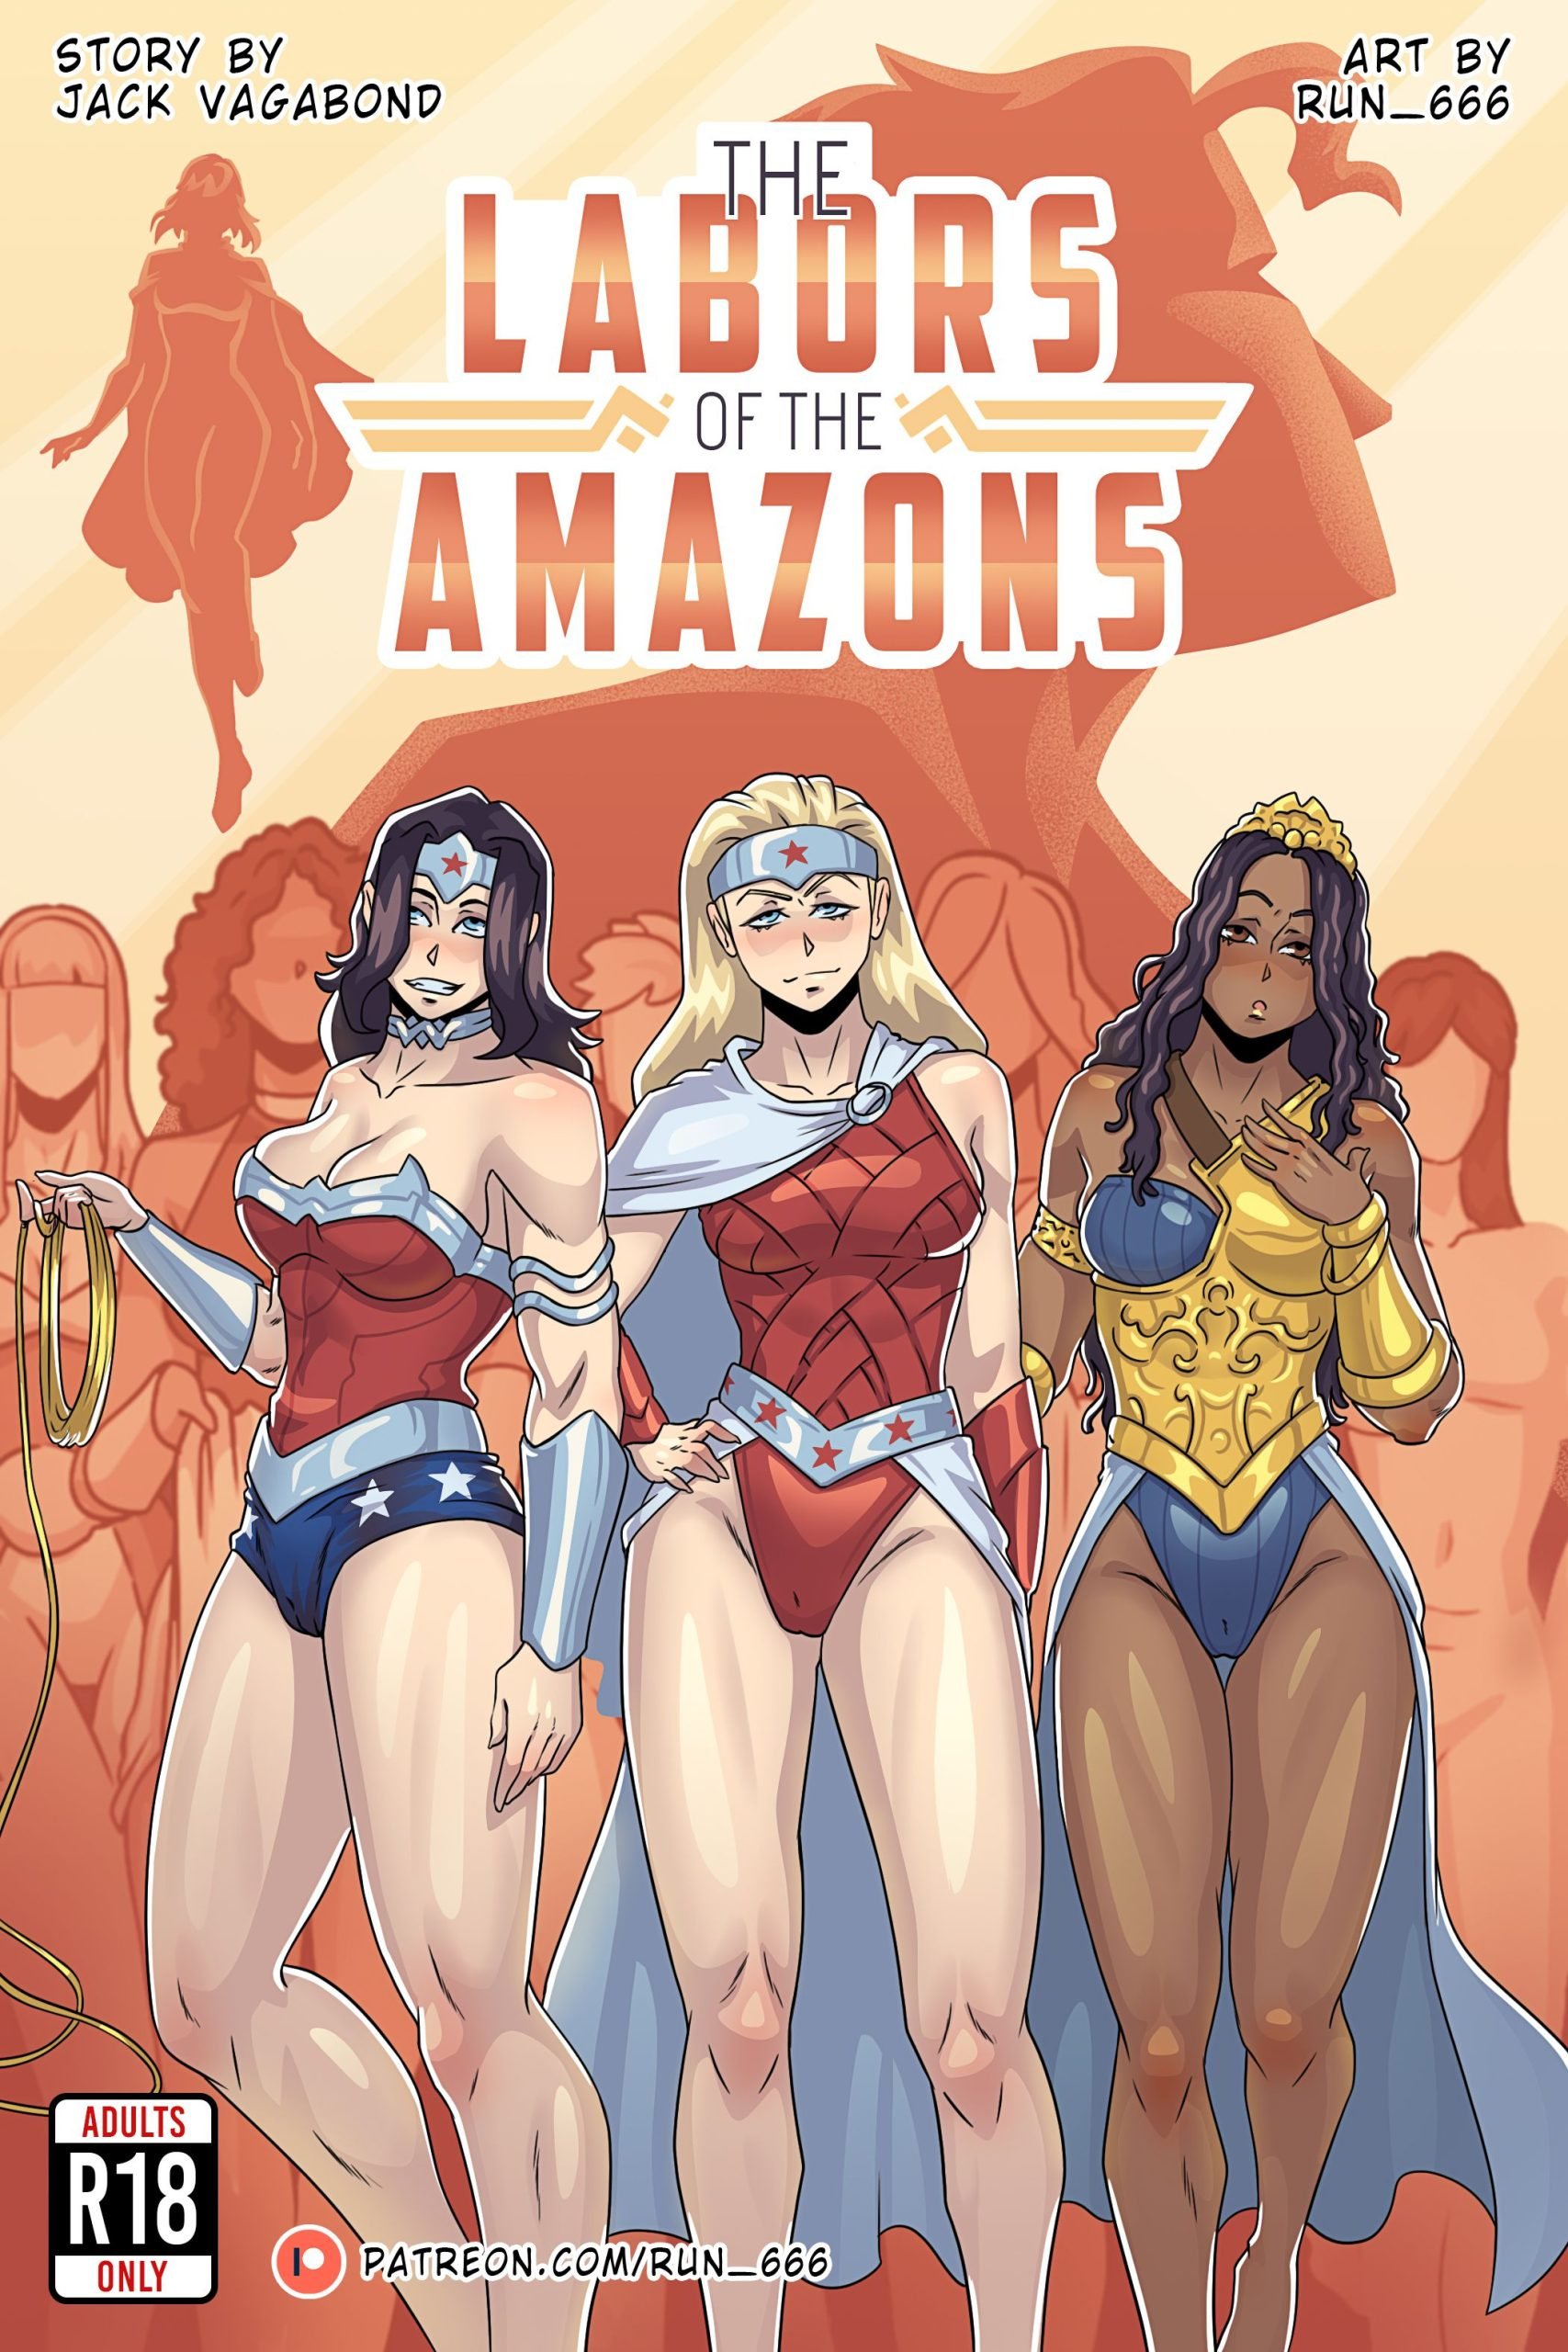 The Labors of the Amazons (Wonder Woman) Run 666 Porn Comic picture